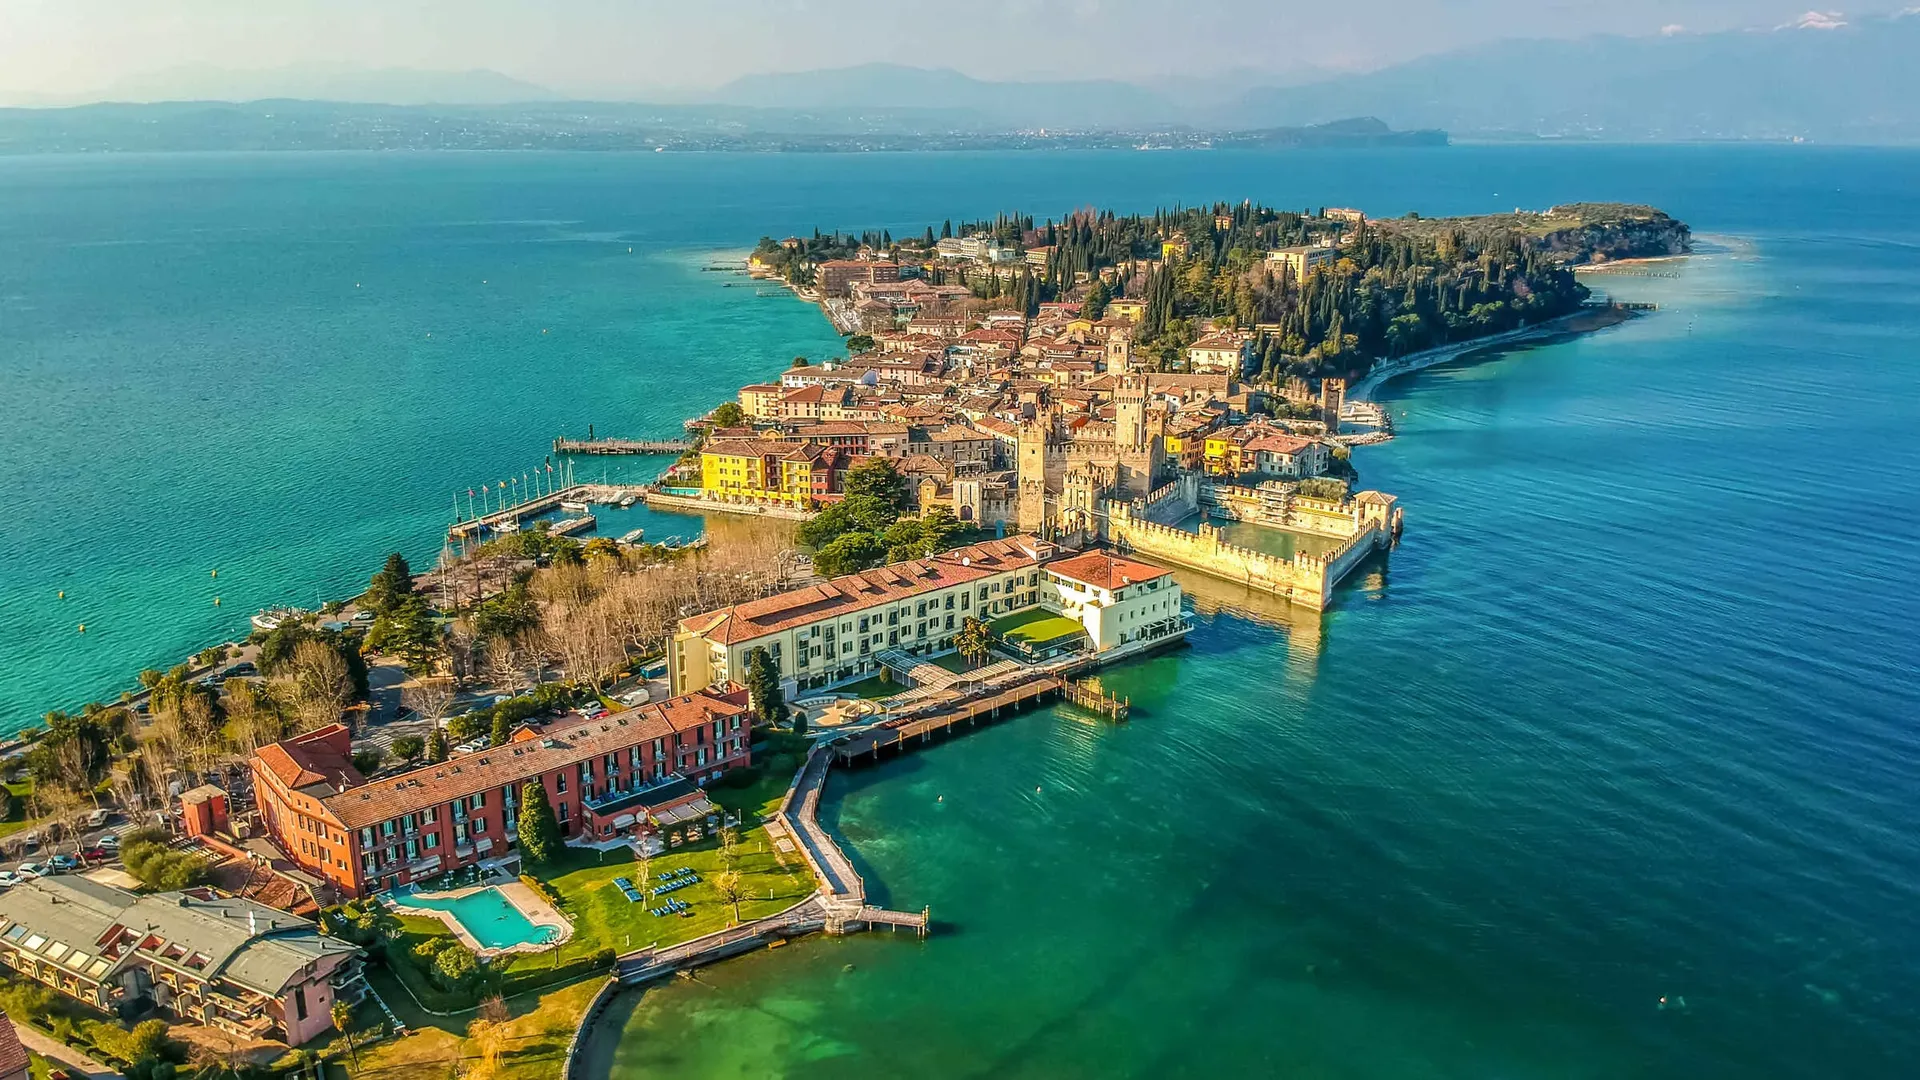 Sirmione | Lombardy Region, Italy - Rated 7.5